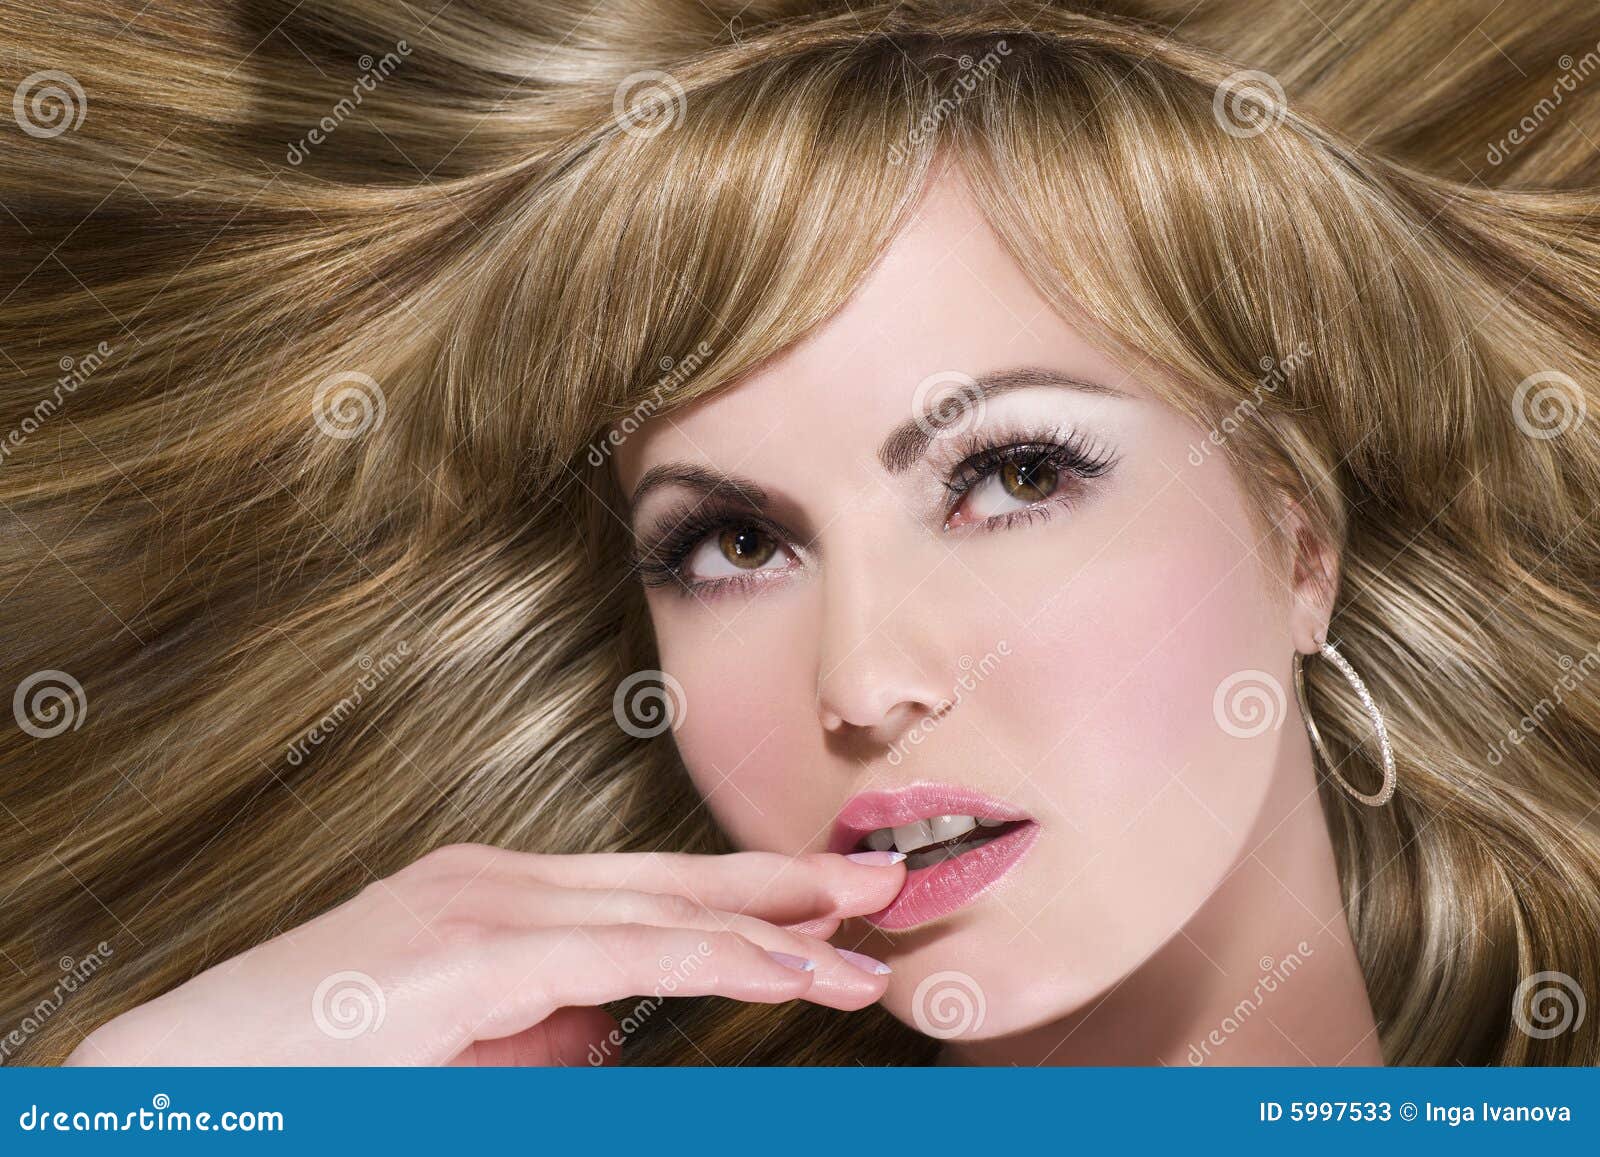 Long blonde hair girl with straight hair - wide 6